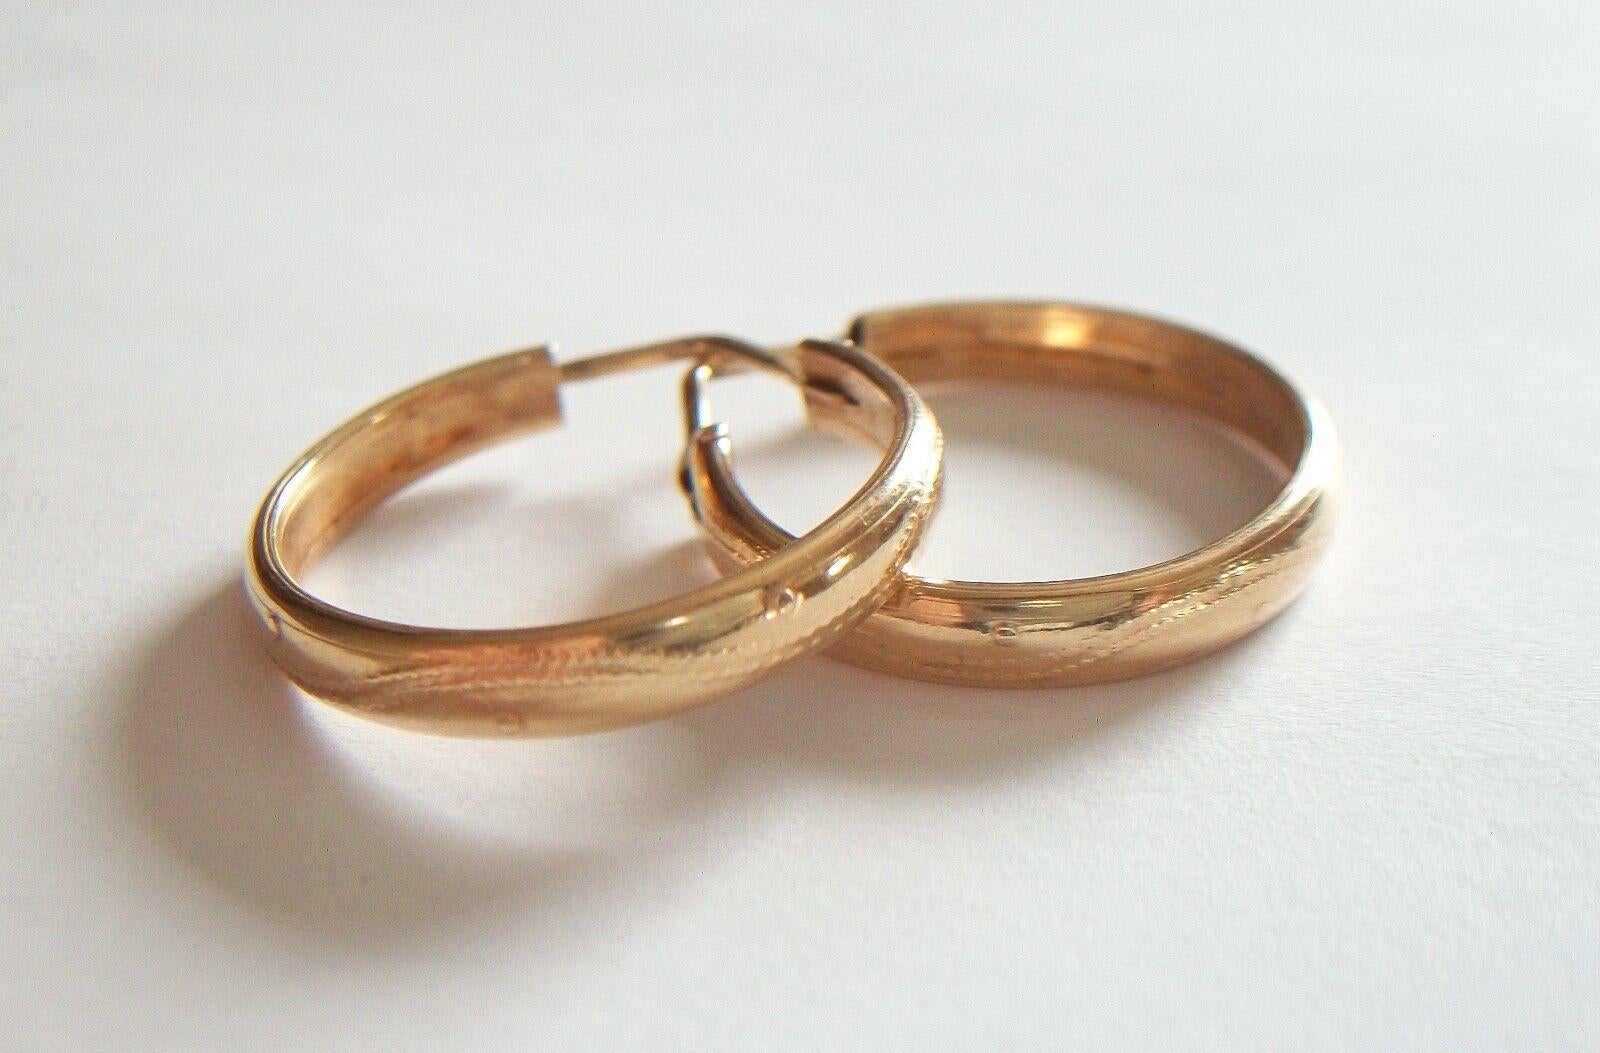 Vintage Vicenza 14K Gold Hoop Earrings, Hand Made, Italy, Mid 20th Century For Sale 1